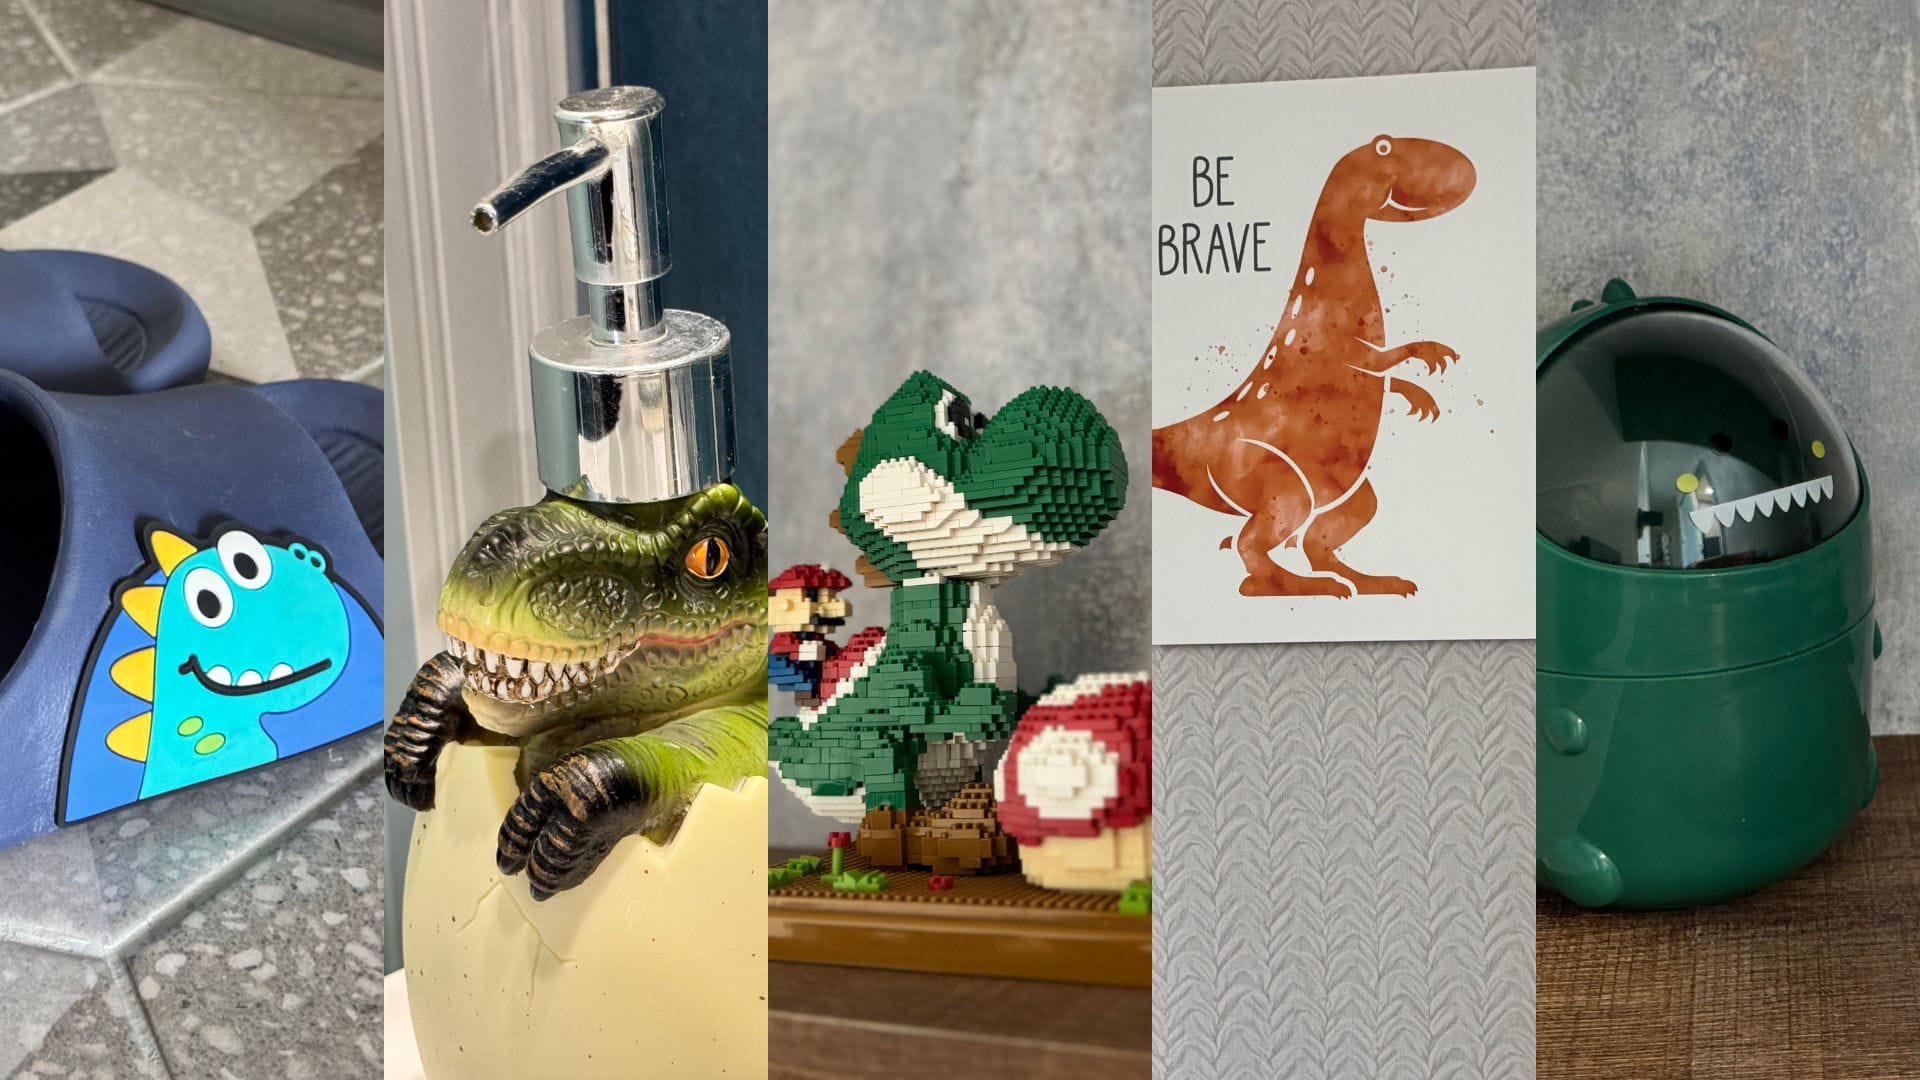 Montage of five images: (1) dinosaur slippers; (2) a dinosaur-shaped hand-soap dispenser; (3) a LEGO-like Super Mario riding a Yoshi dinosaur; (4) painting of a dinosaur with the words ‘Be Brave’ written alongside; (5) a dinosaur-shaped desktop trash container.